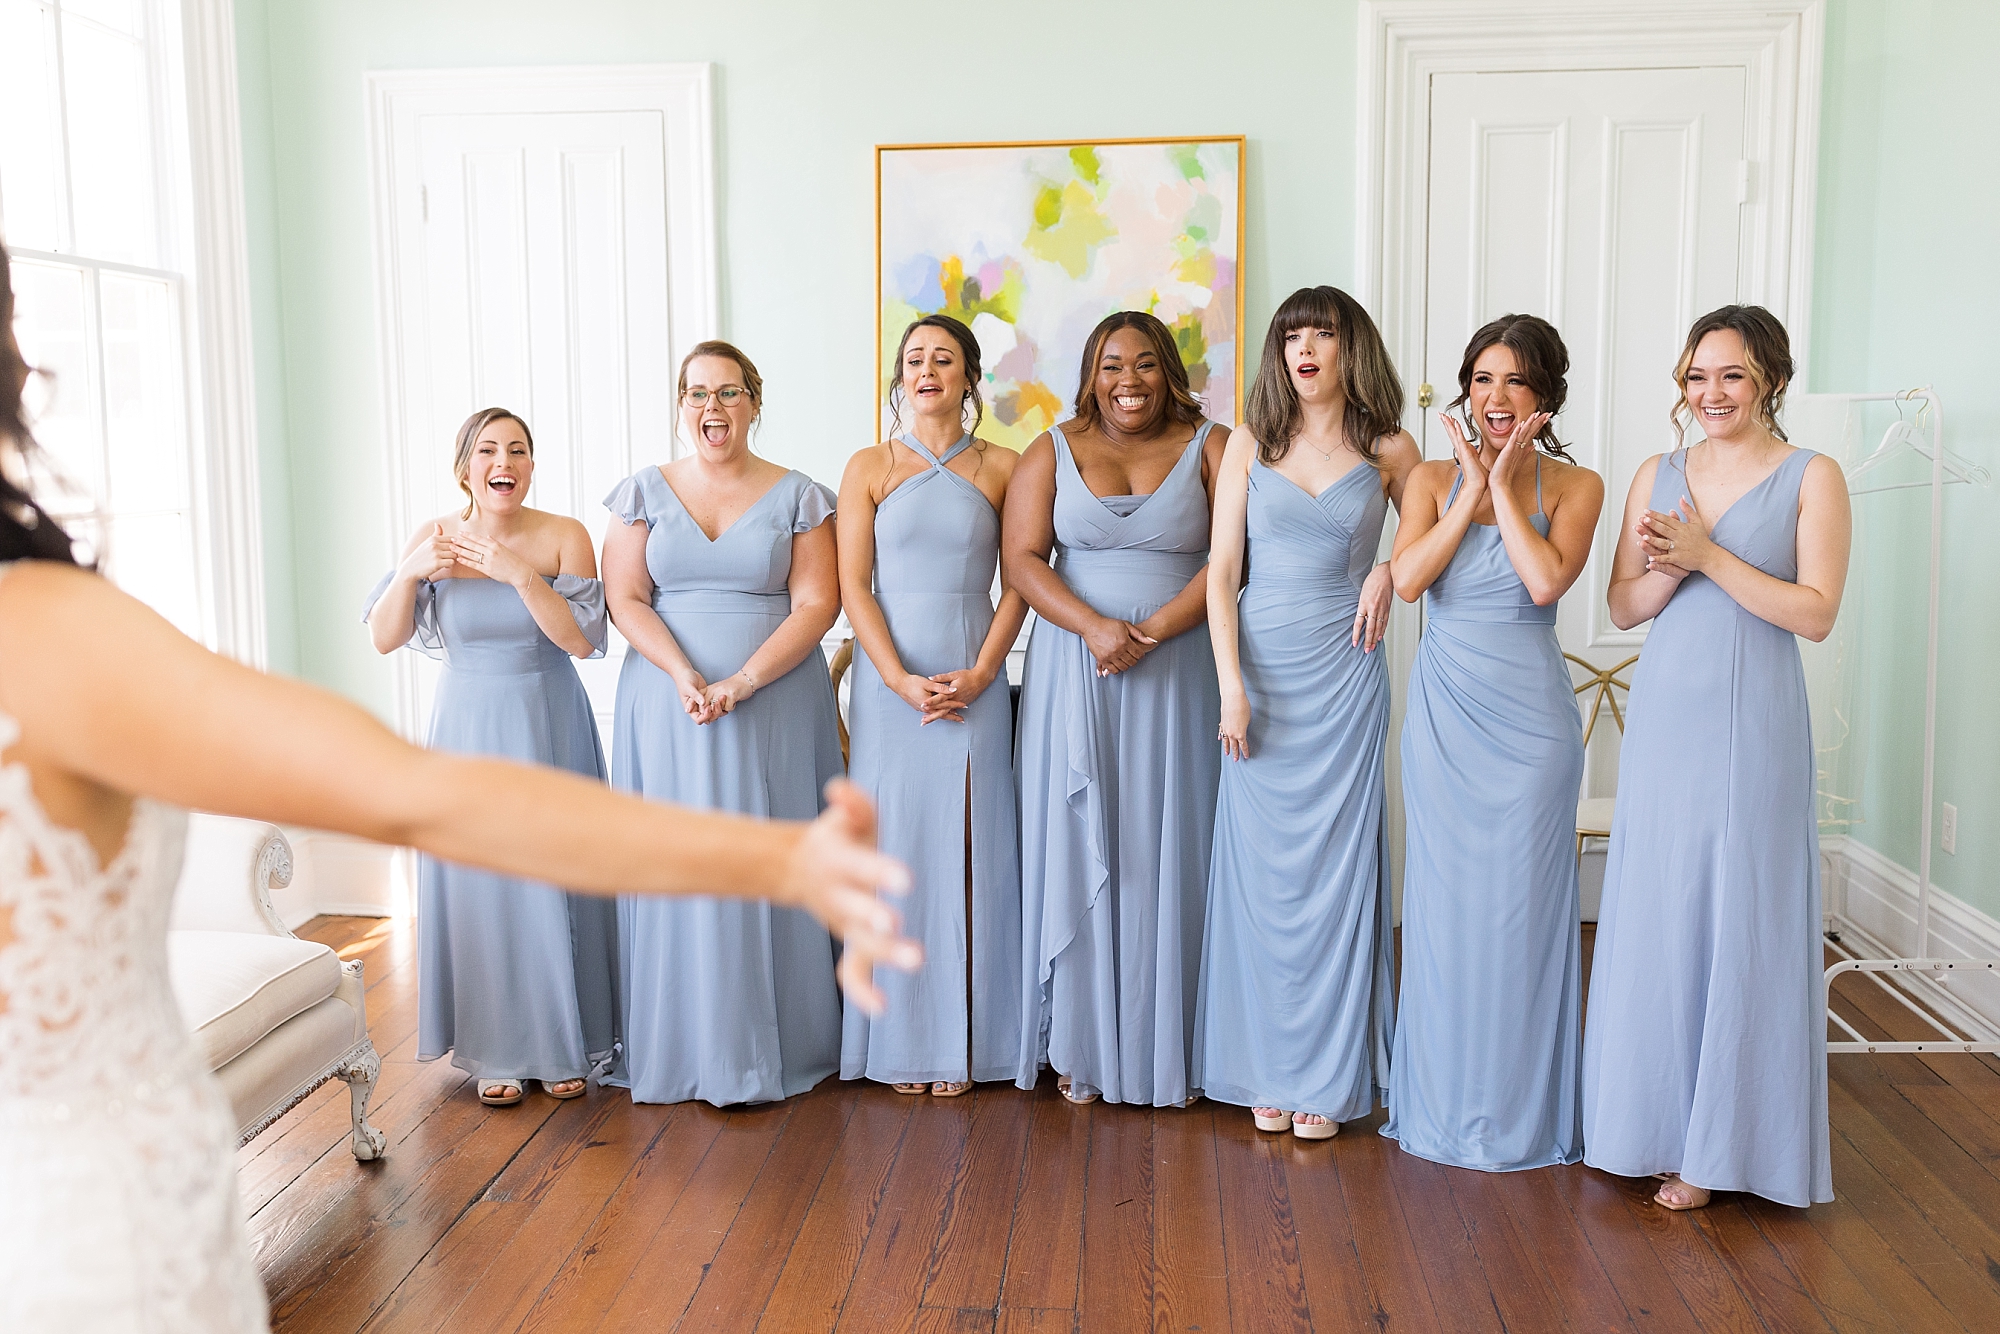 Bridesmaids first look of the bride | Raleigh NC Wedding Photographer